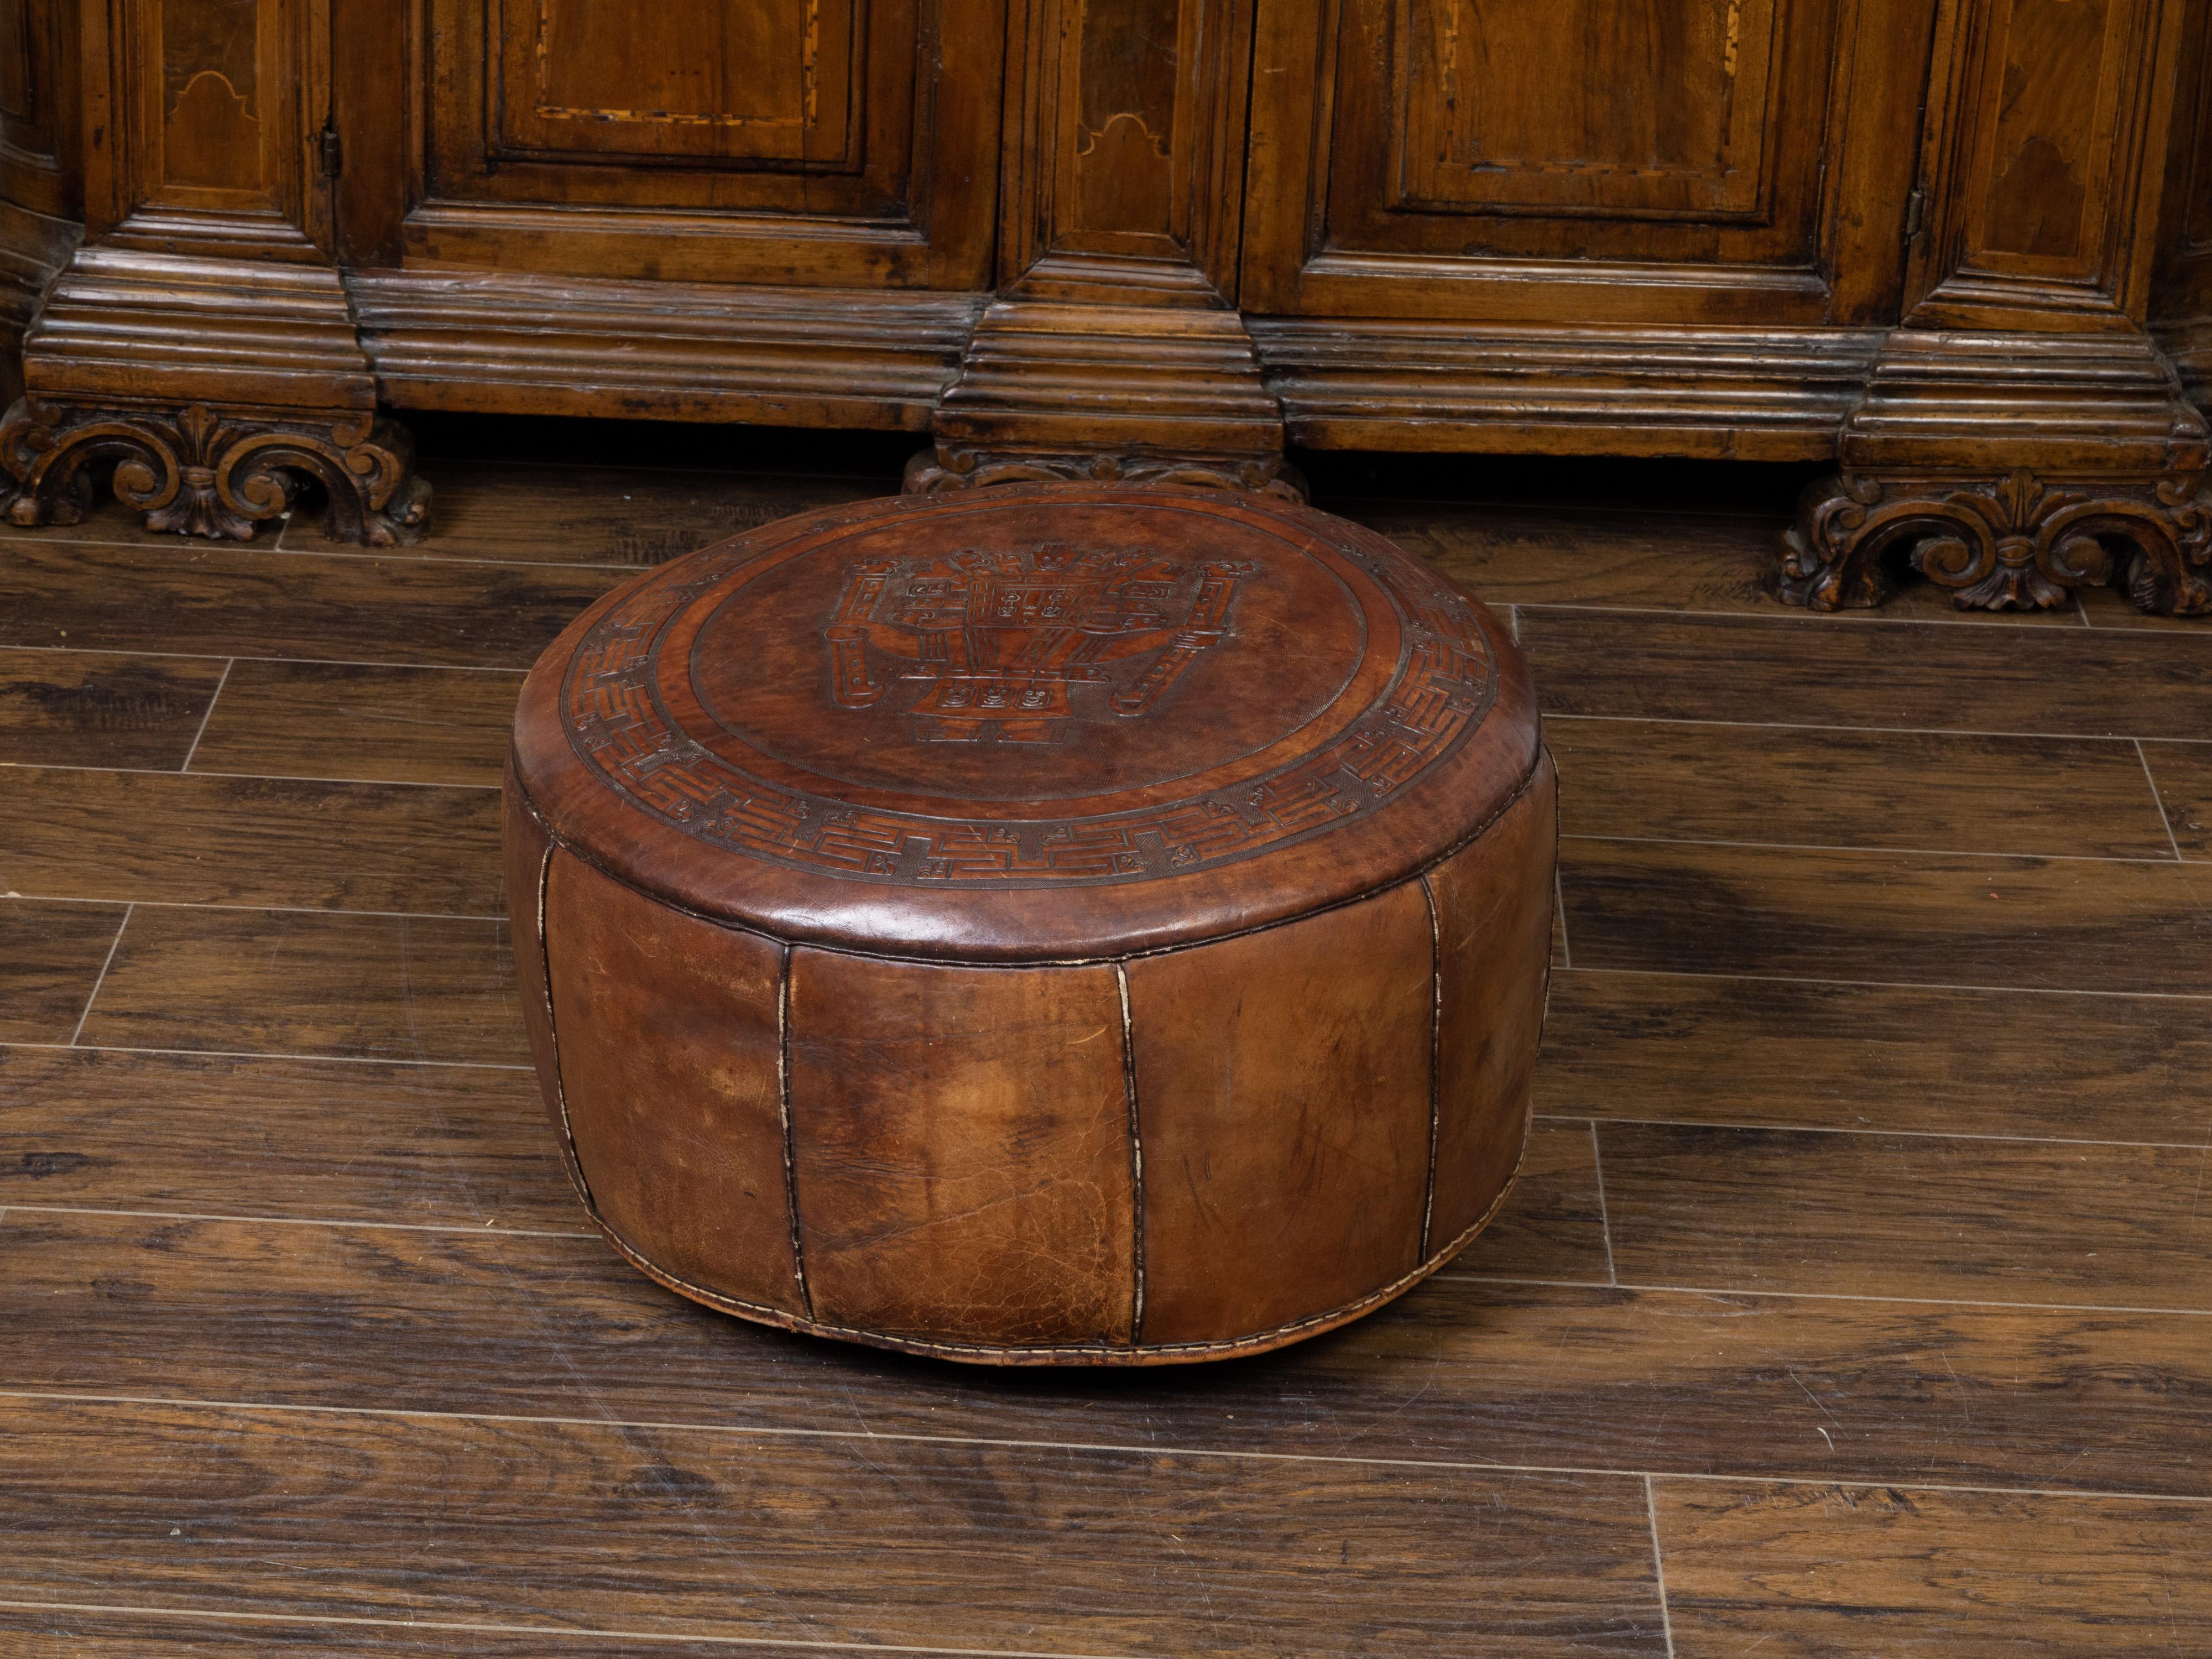 A vintage leather pouf from the mid 20th century, with Mesoamerican motifs and dark brown patina. Created during the midcentury period, this leather pouf captures our attention with its central Mesoamerican tooled décor surrounded by a meander